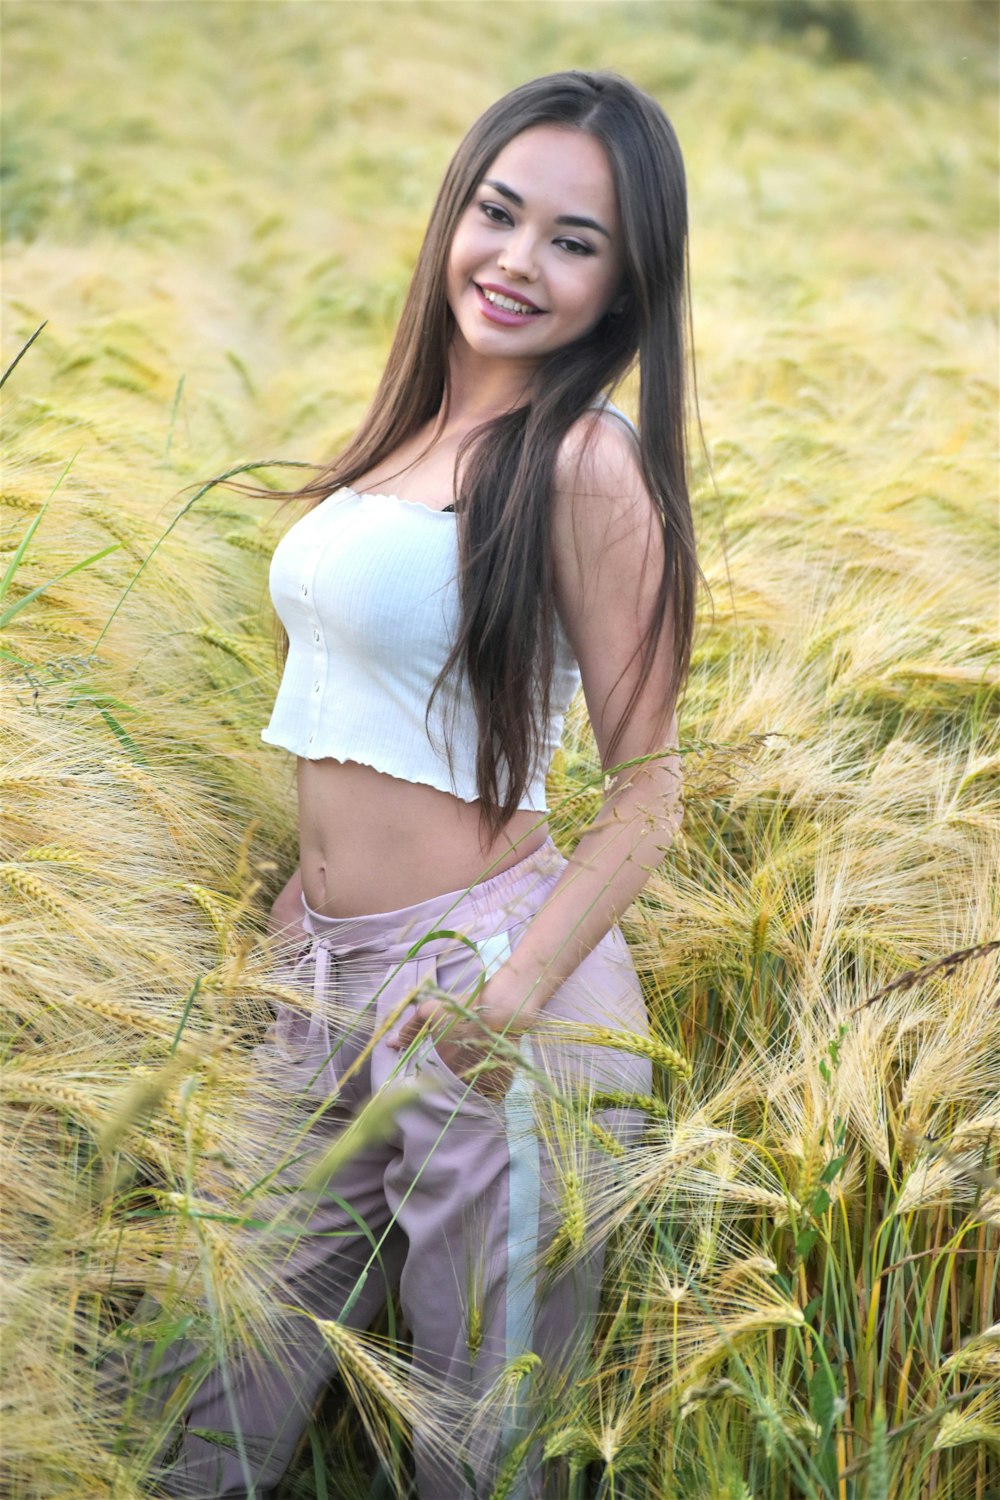 a woman standing in a field of tall grass